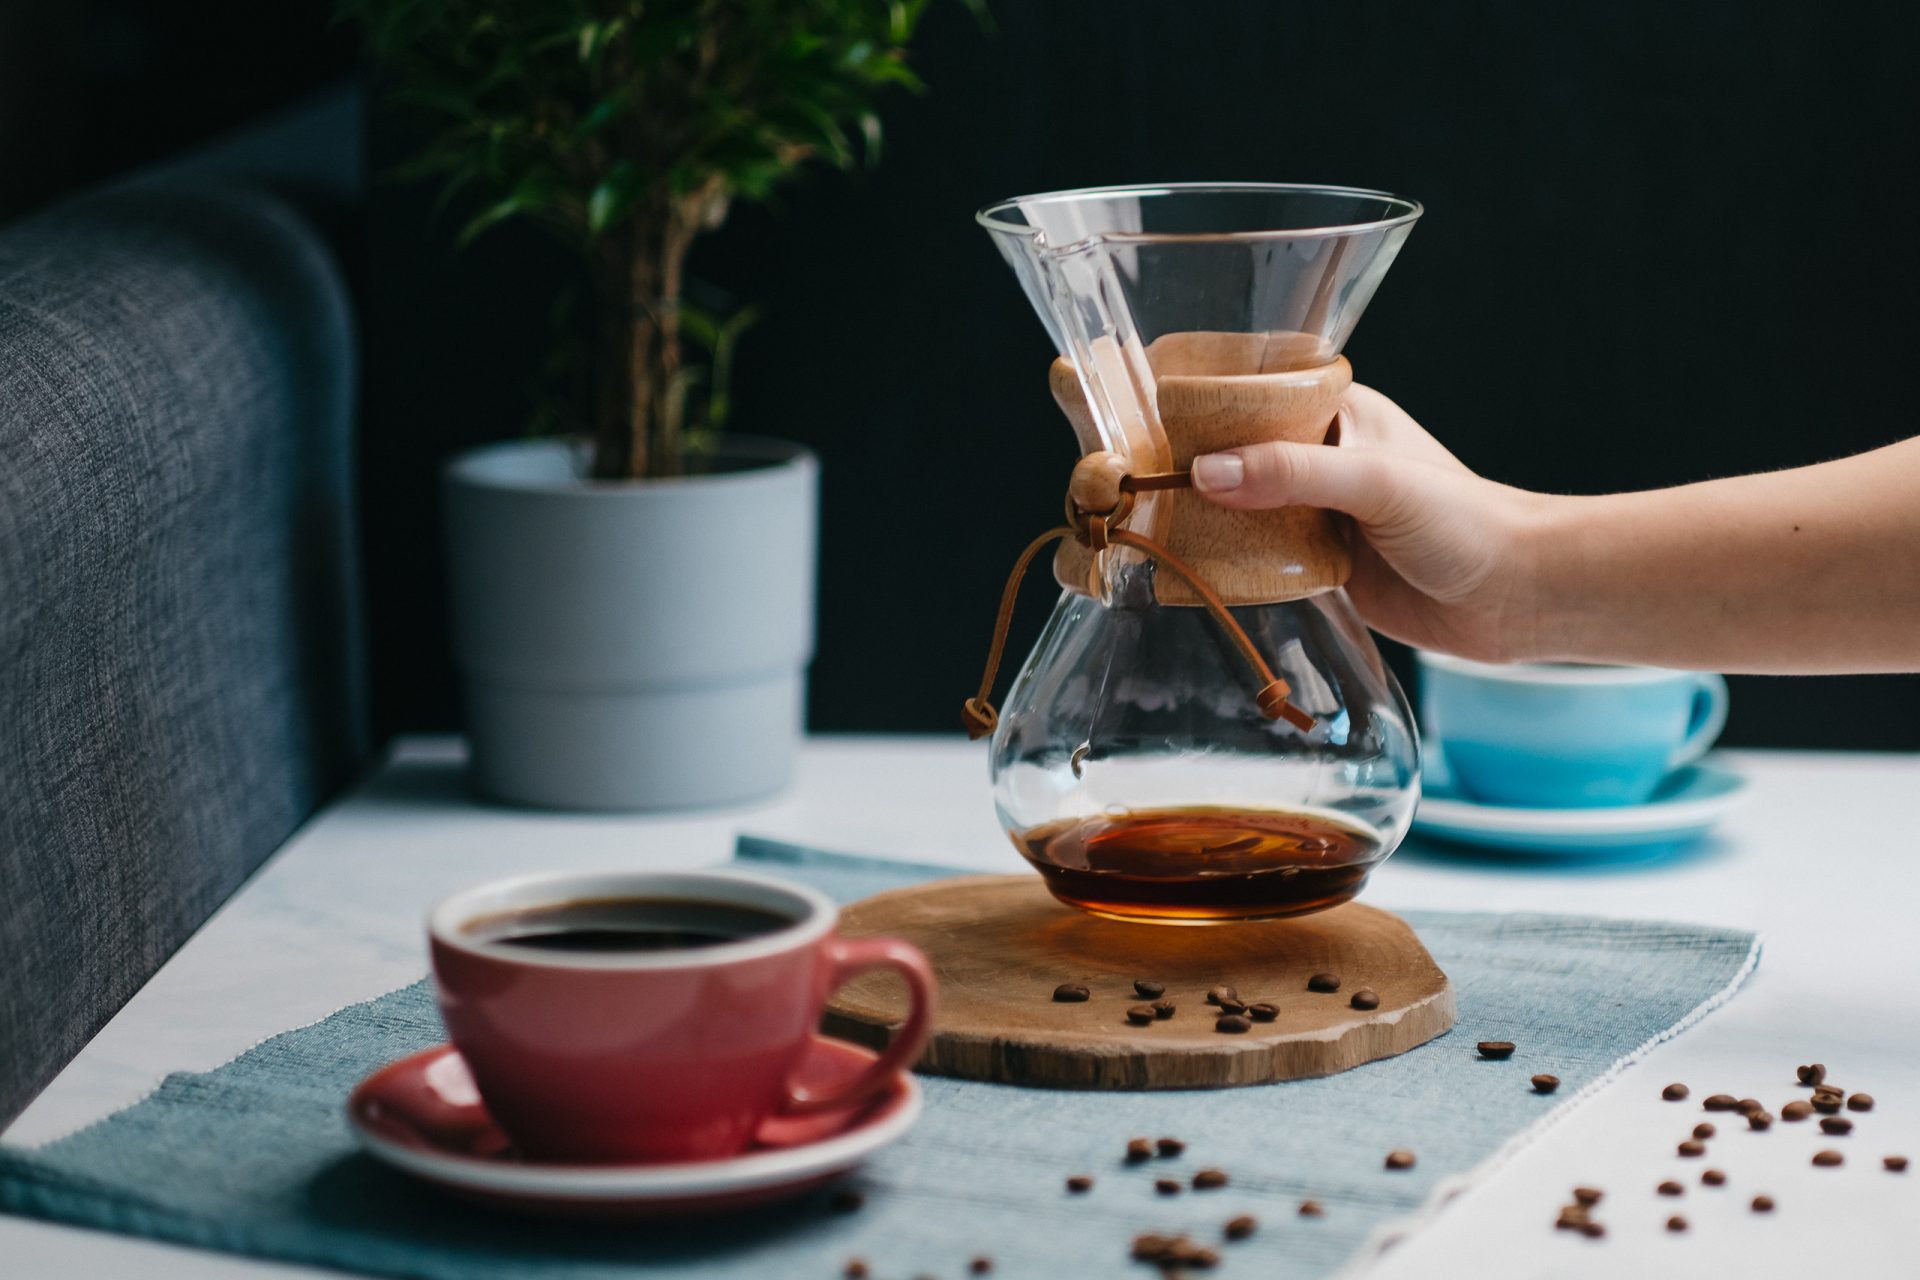 How to Make the Perfect Coffee with the Chemex